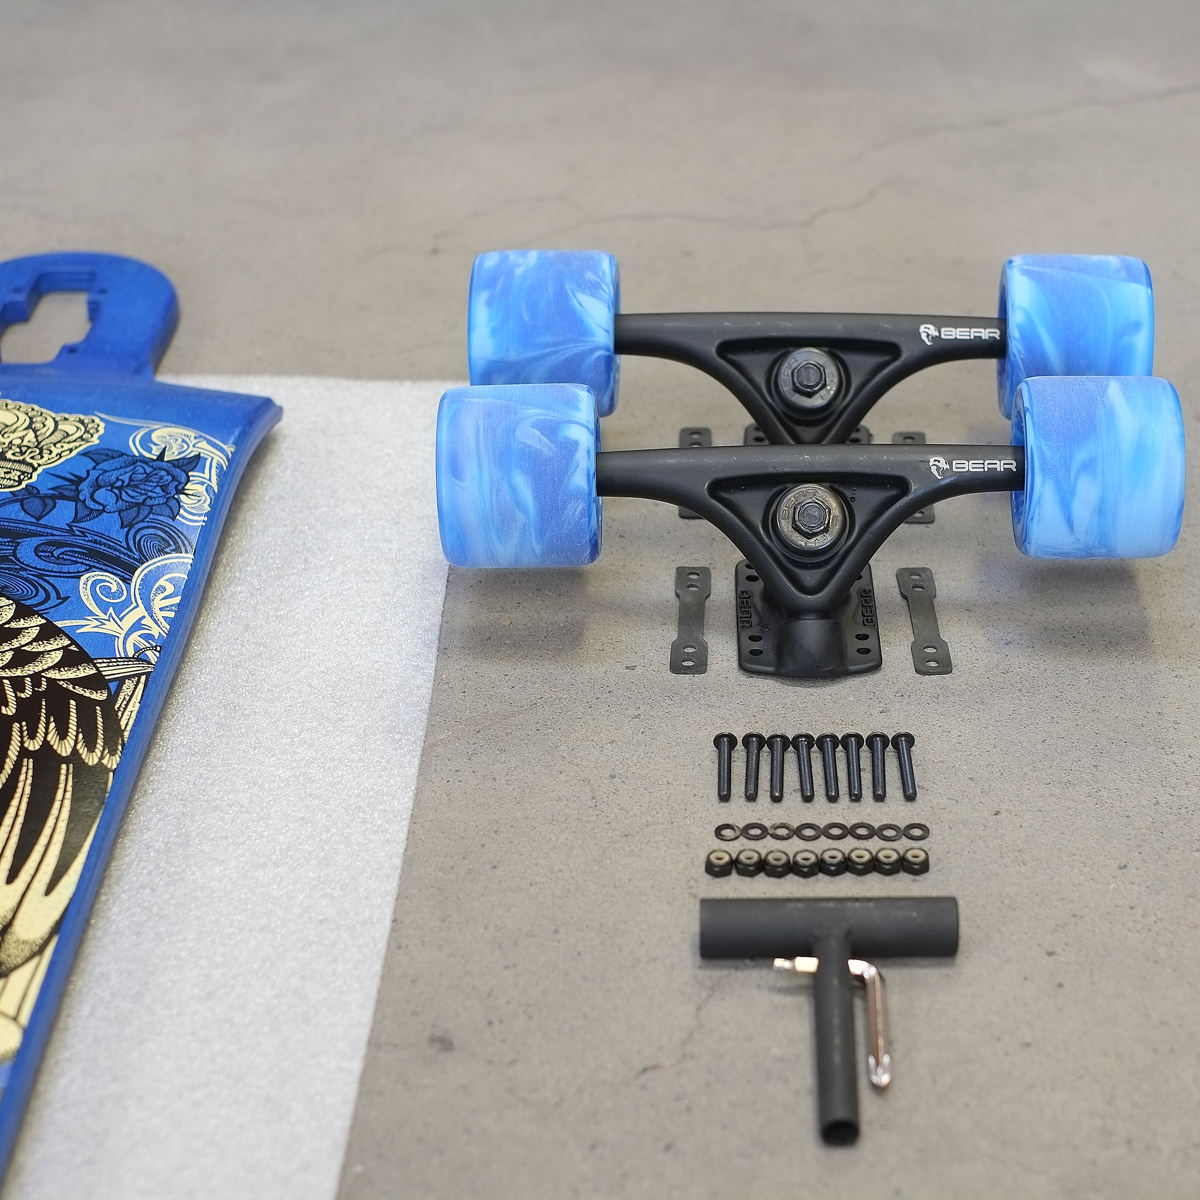 DIY: How To Assemble A Drop Through Deck - The Longboard Store